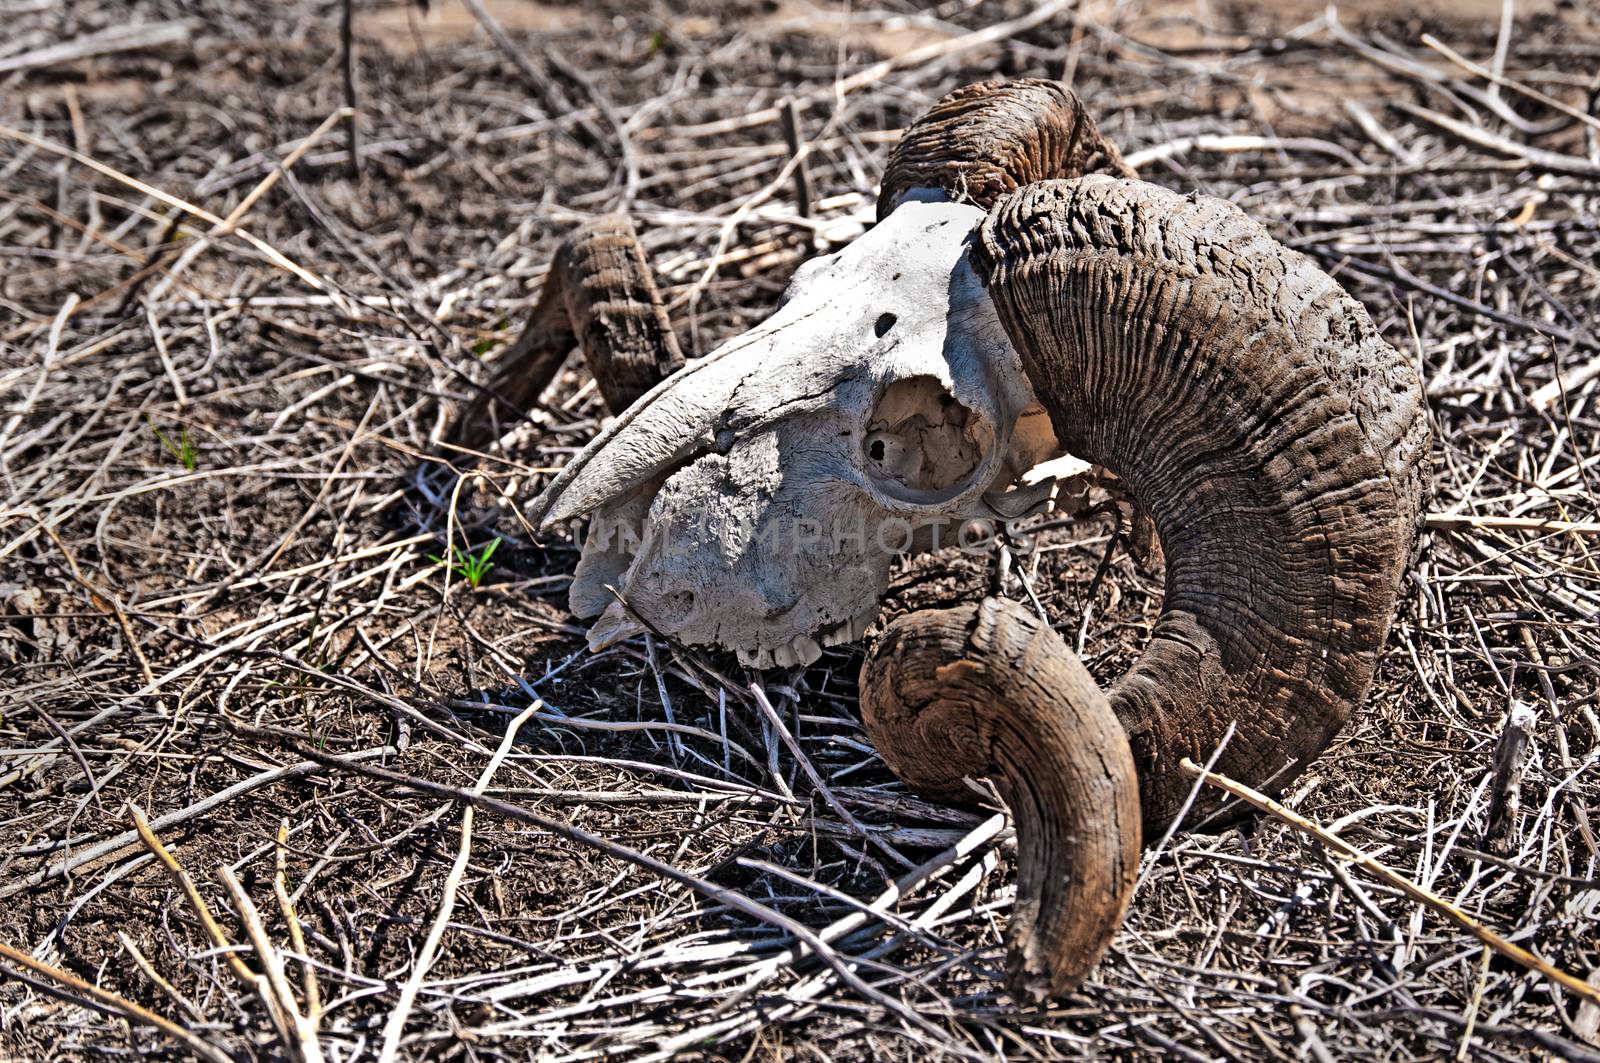 Weathered ram's skull laying on the high plains among dried twigs and grass.